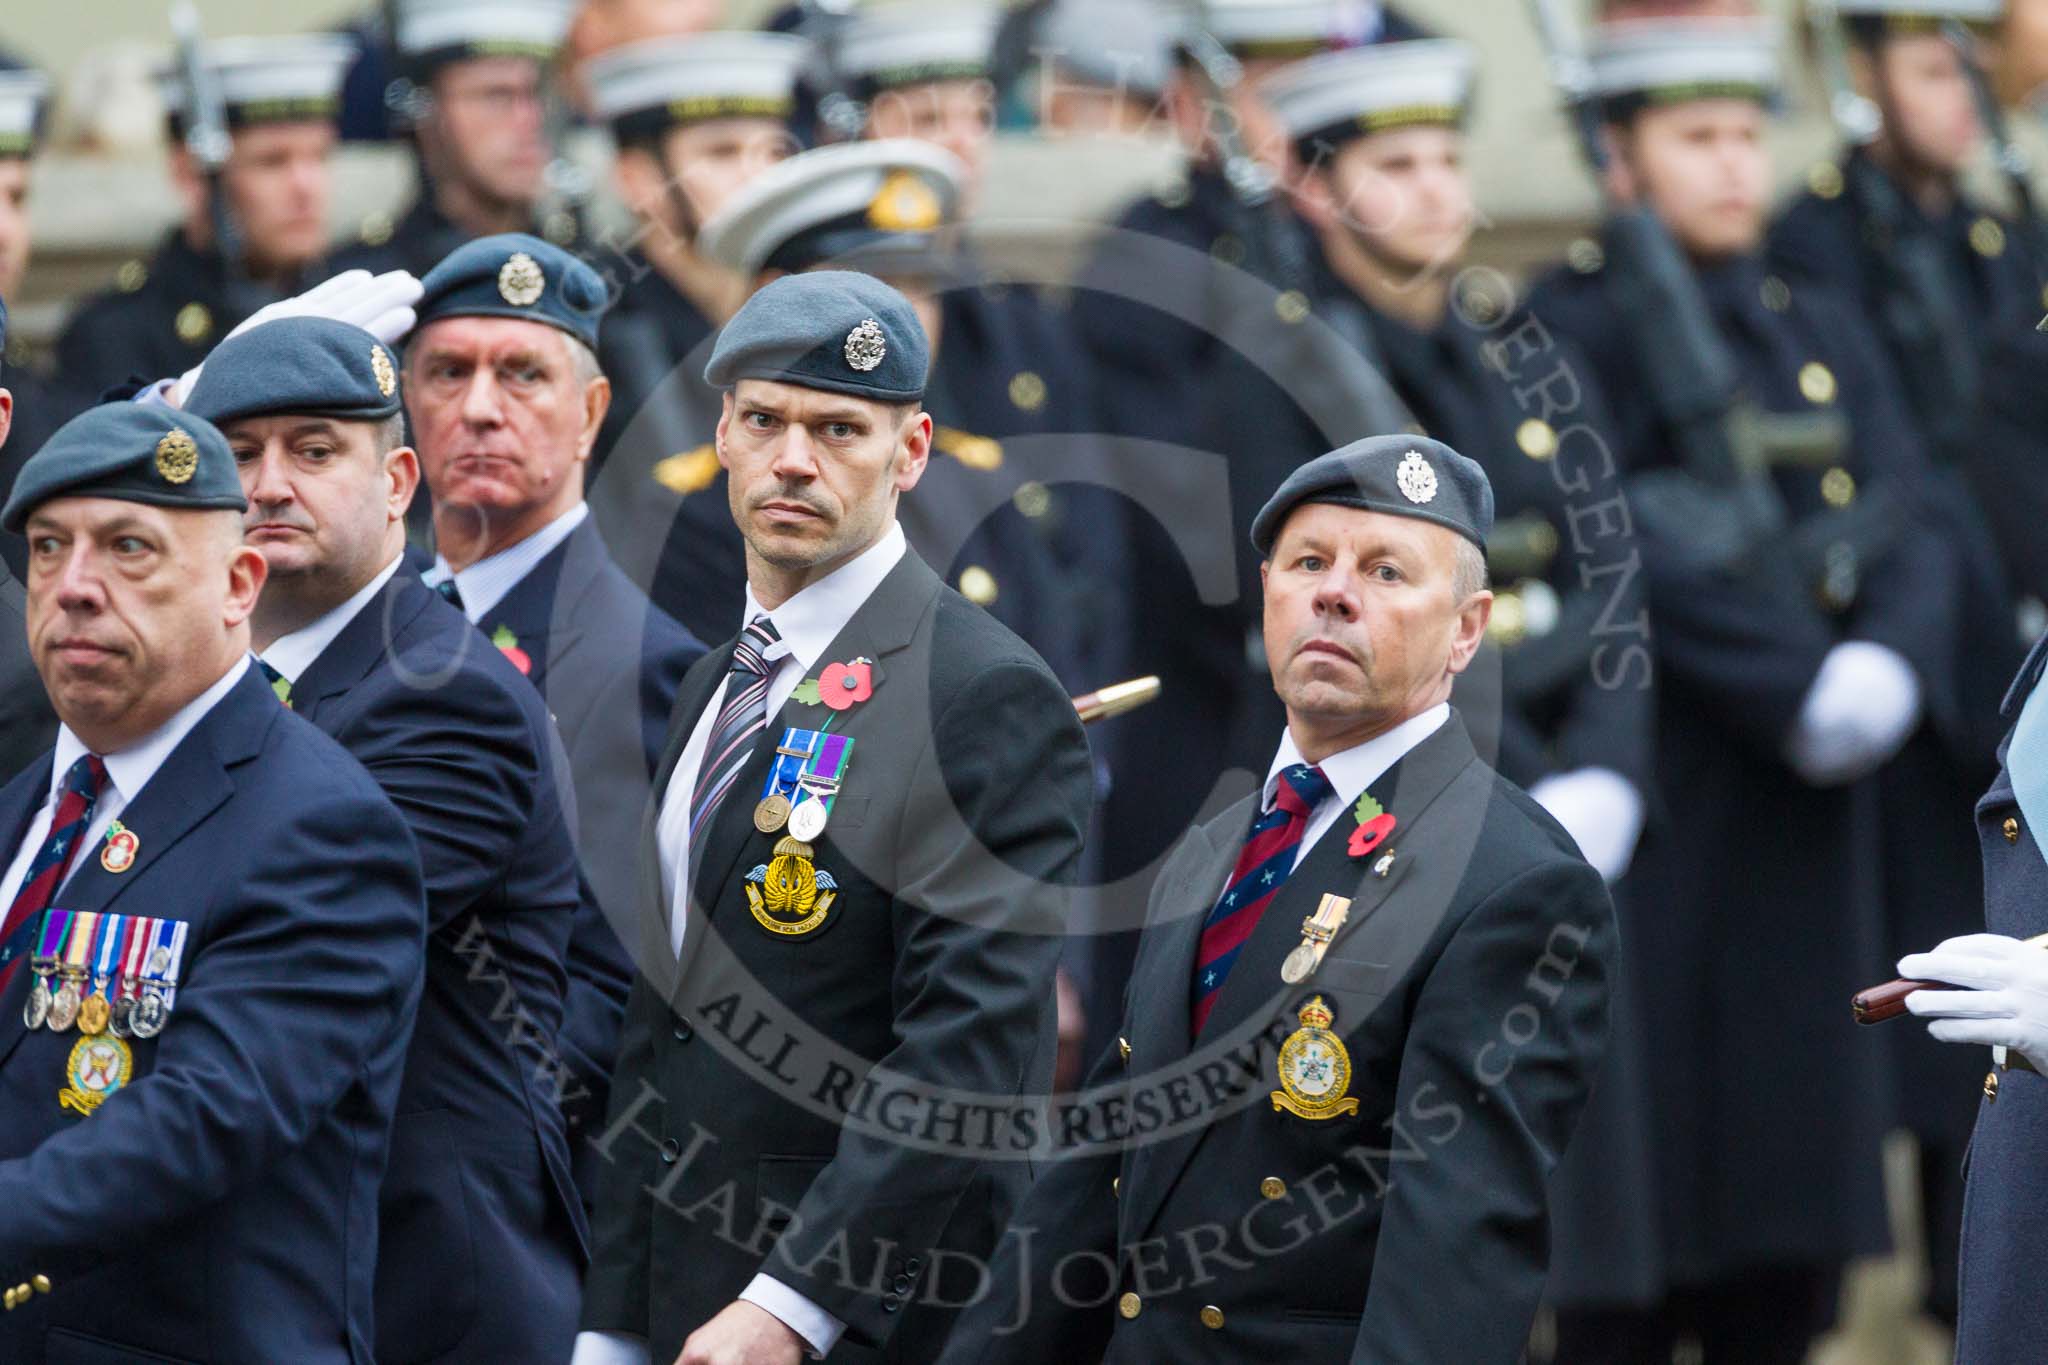 Remembrance Sunday at the Cenotaph 2015: C2, Royal Air Force Regiment Association.
Cenotaph, Whitehall, London SW1,
London,
Greater London,
United Kingdom,
on 08 November 2015 at 11:47, image #425